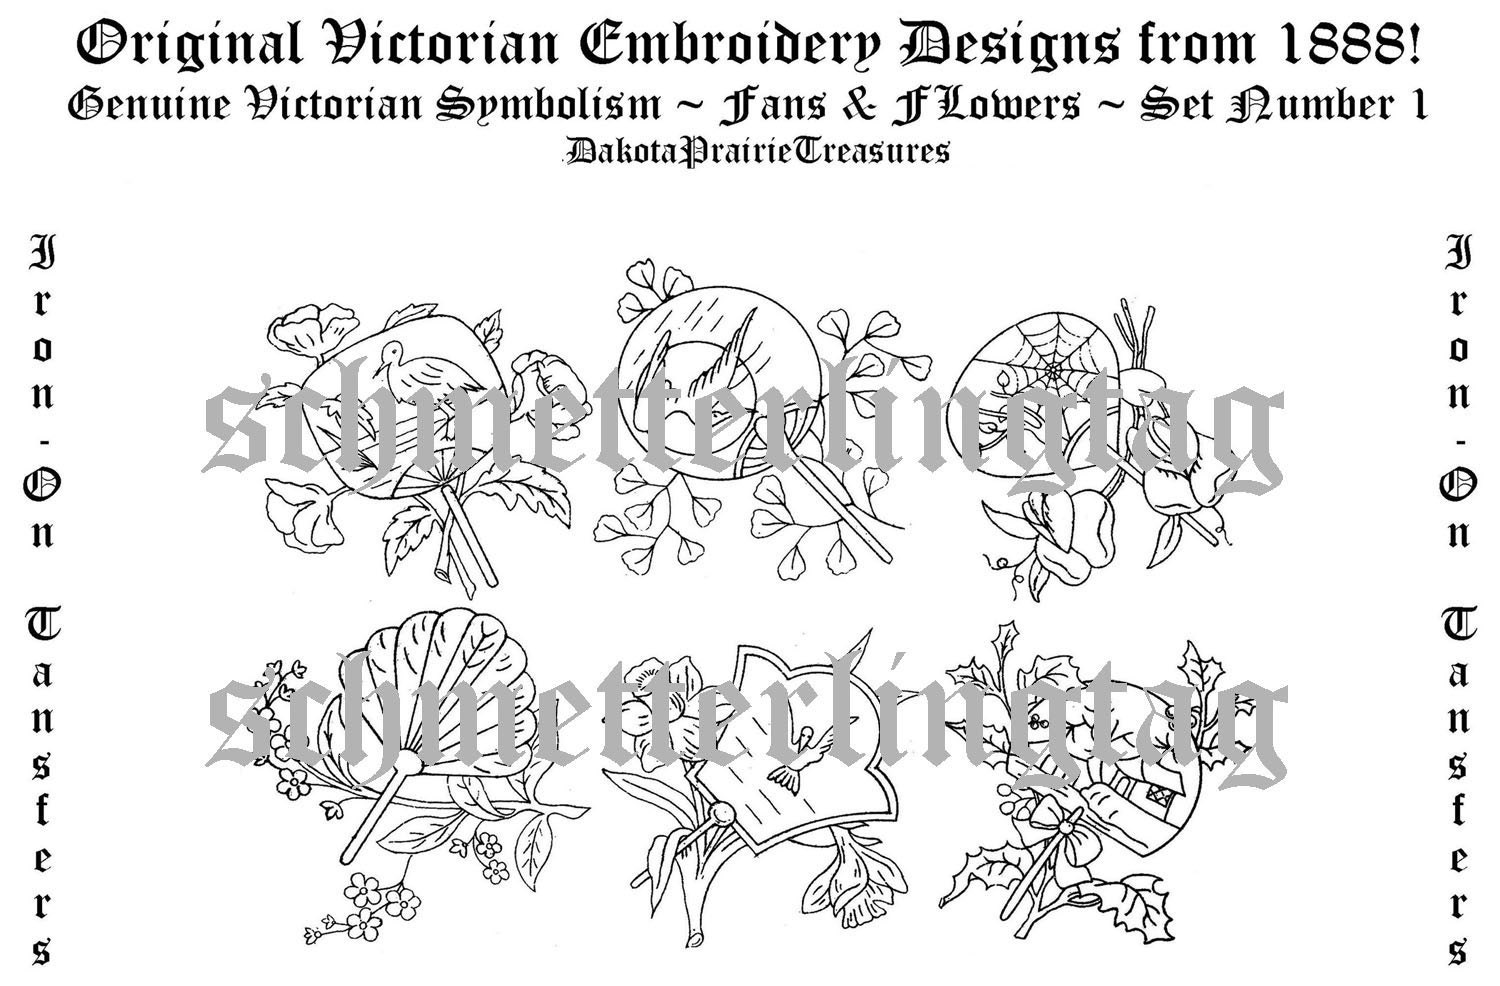 Hand Embroidery Transfers - Compare Prices, Reviews and Buy at